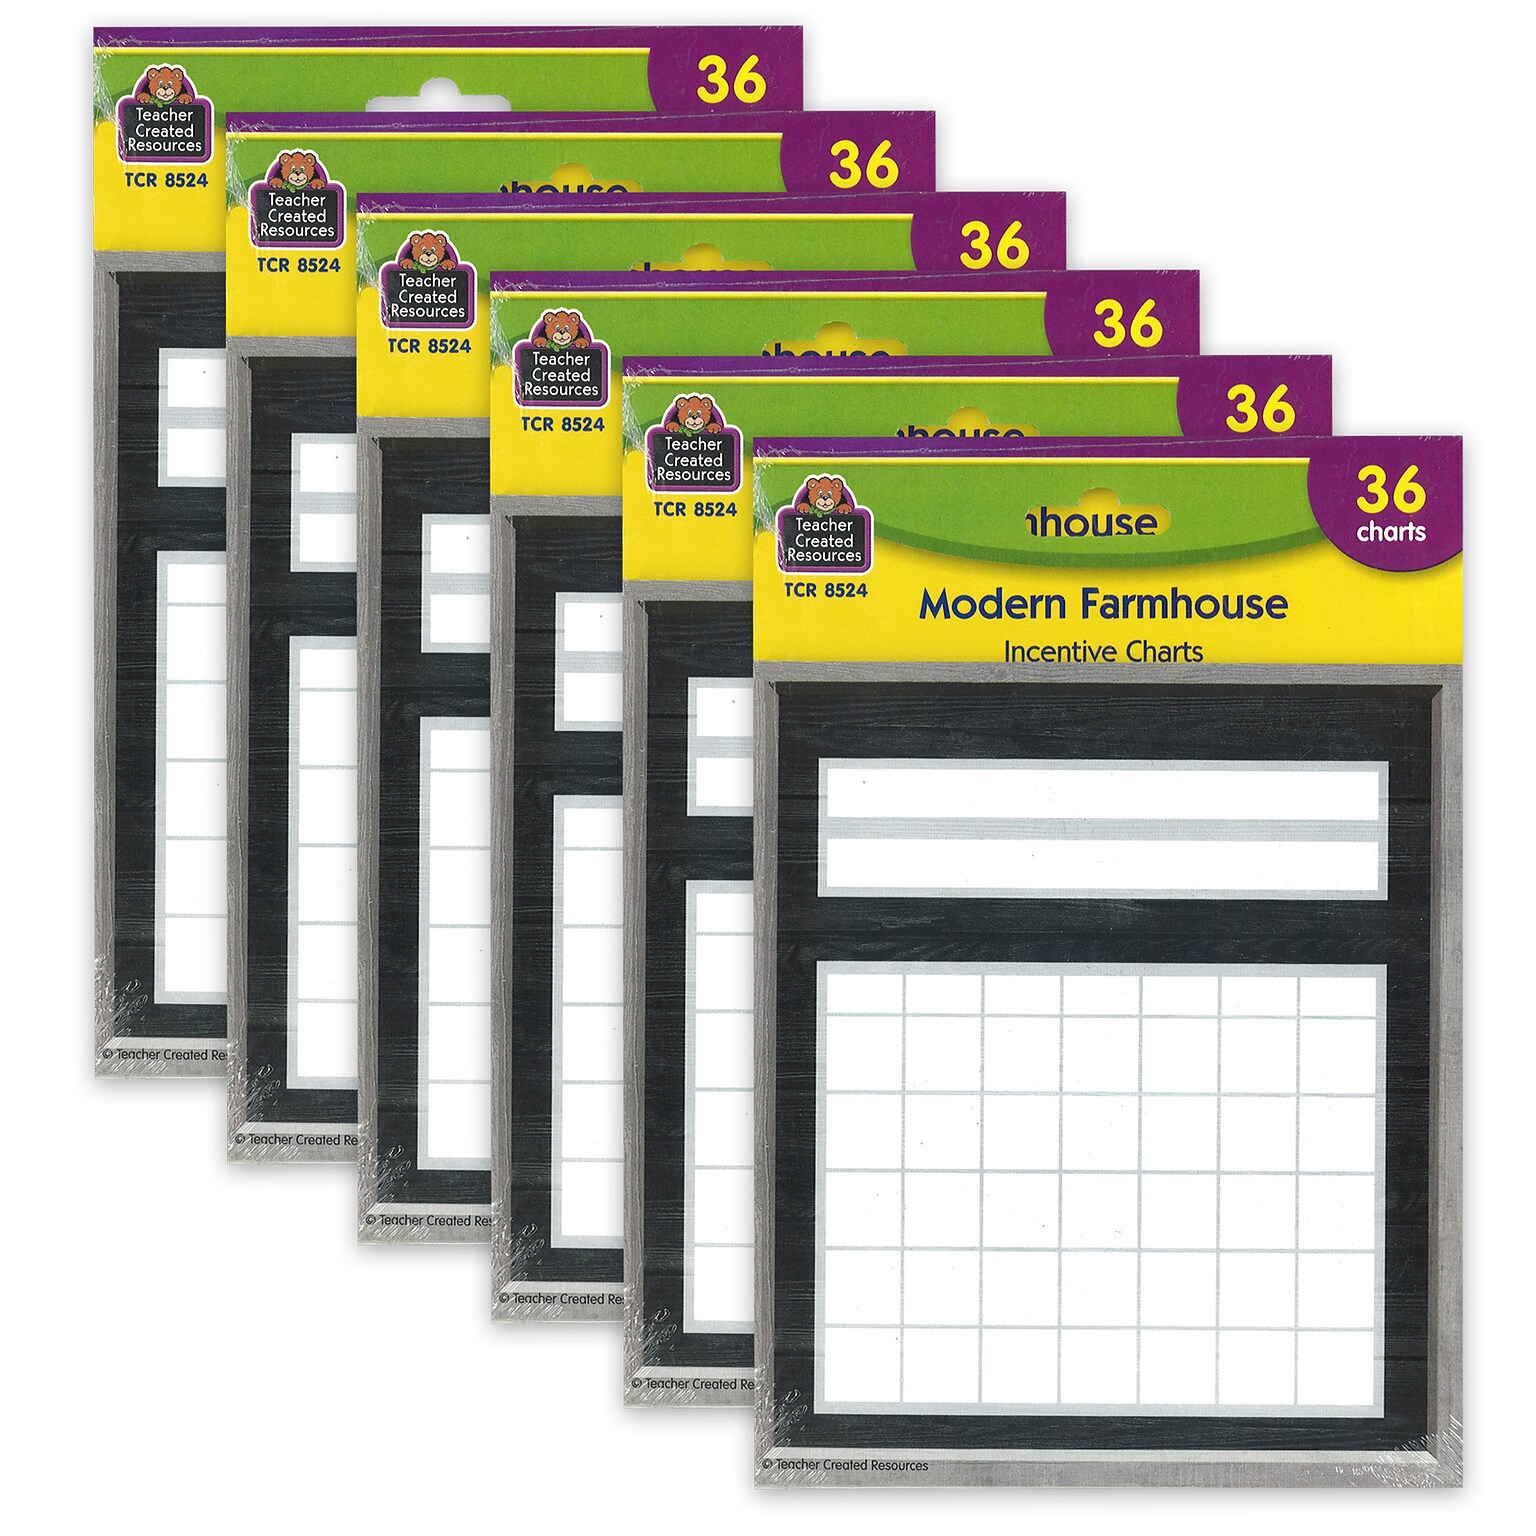 Teacher Created Resources Incentive Chart, 5.25 x 6, Modern Farmhouse, 36 Per pack, Pack of 6 (TCR8524-6)